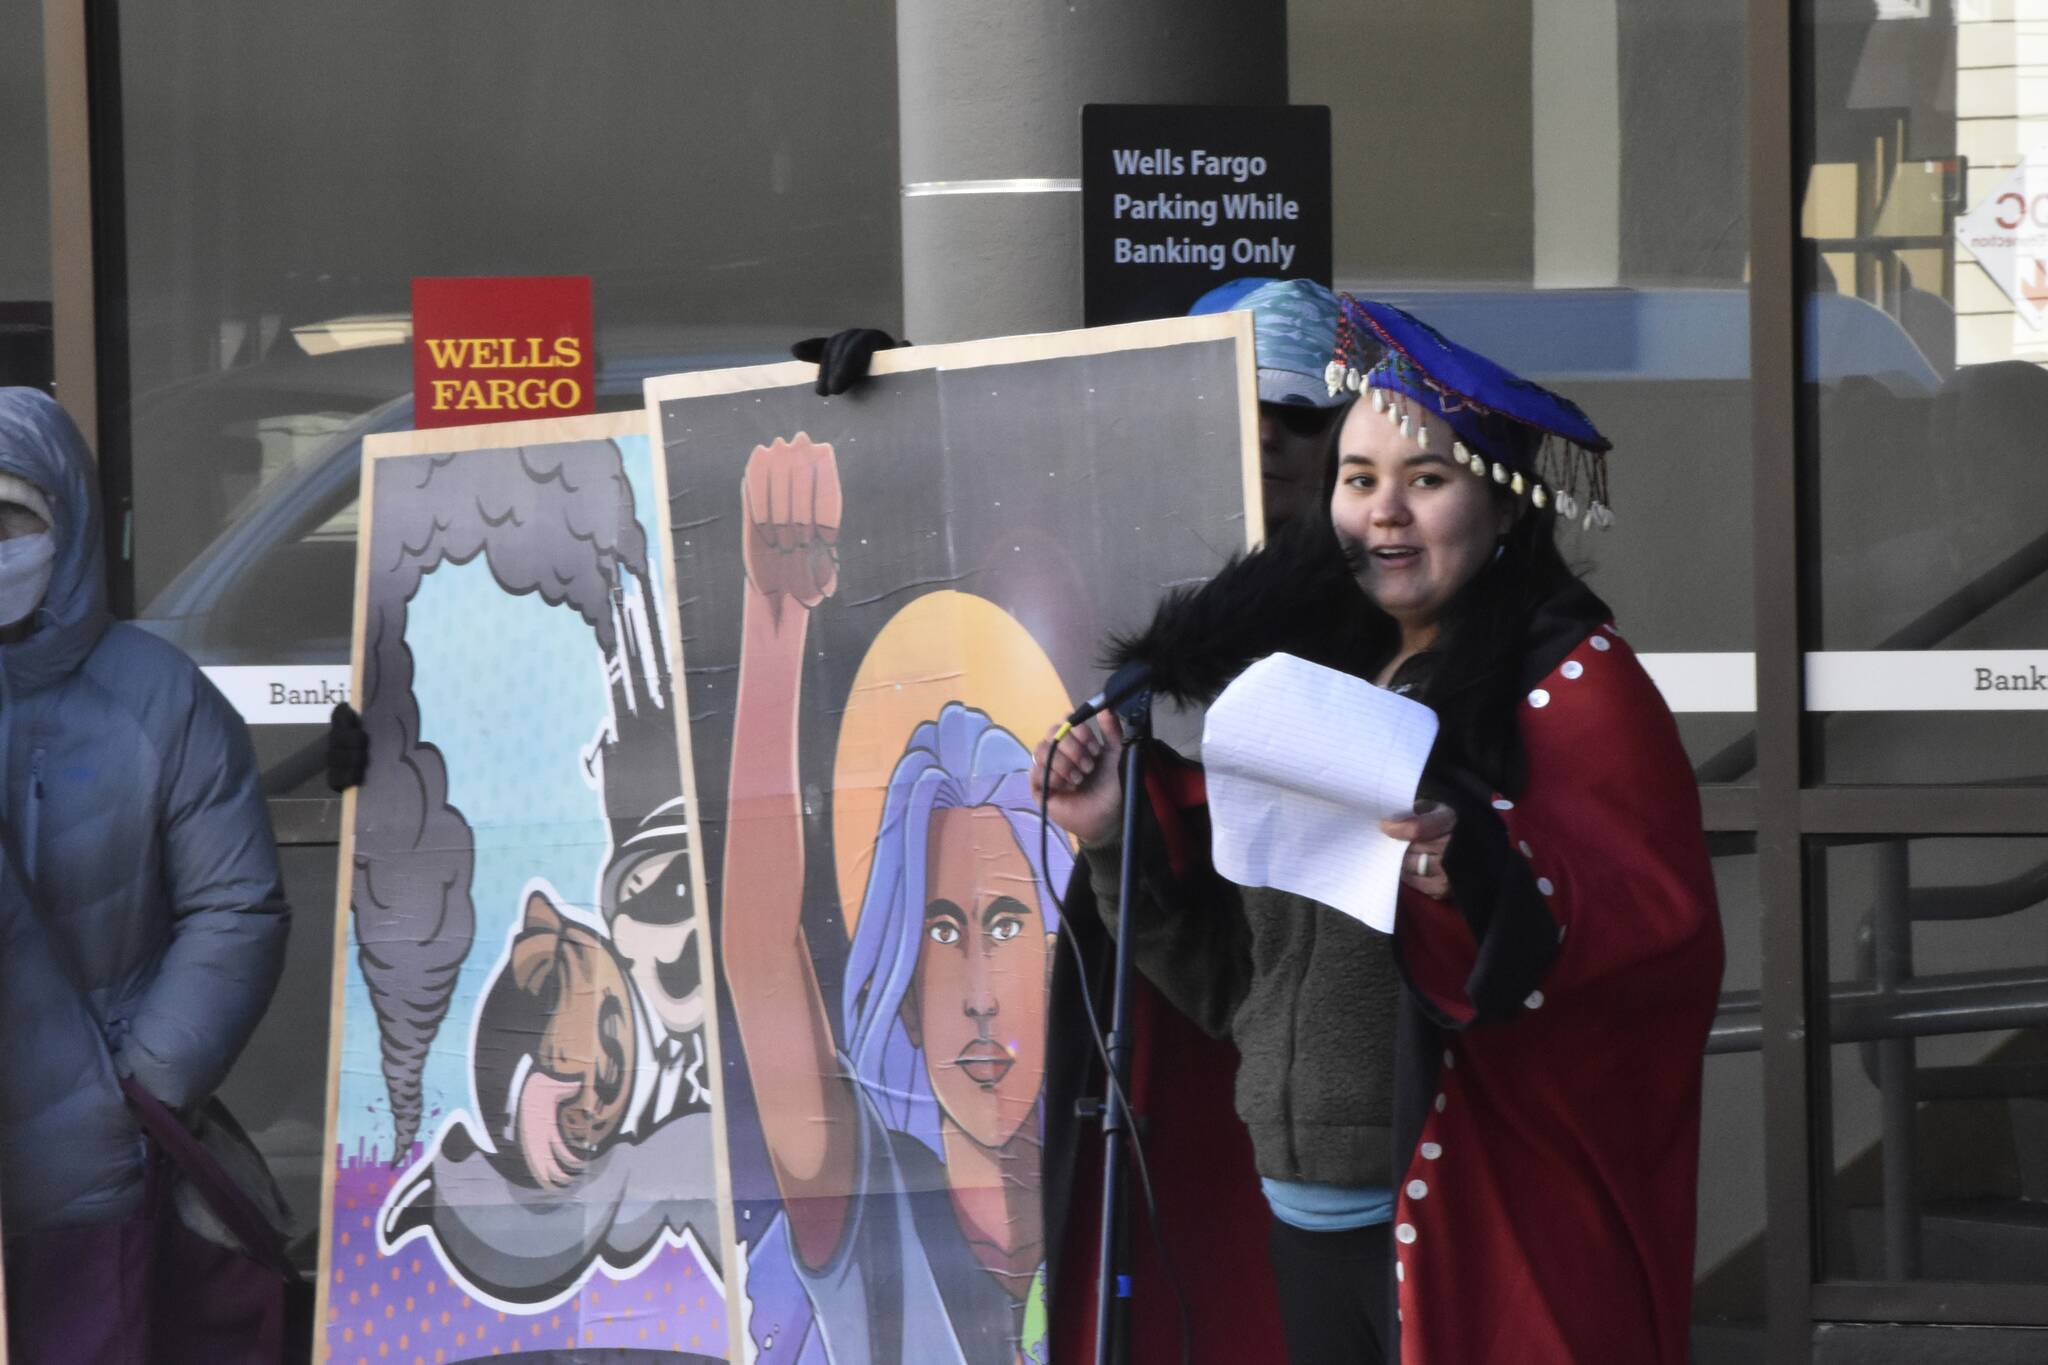 Rebekah Contreras, a local activist with the Women’s Earth and Climate Action Network spoke at a demonstration in front of the downtown Juneau branch of Wells Fargo on Monday, April 11, 2022, urging the company’s leadership to stop funding new fossil fuel projects. (Peter Segall / Juneau Empire)